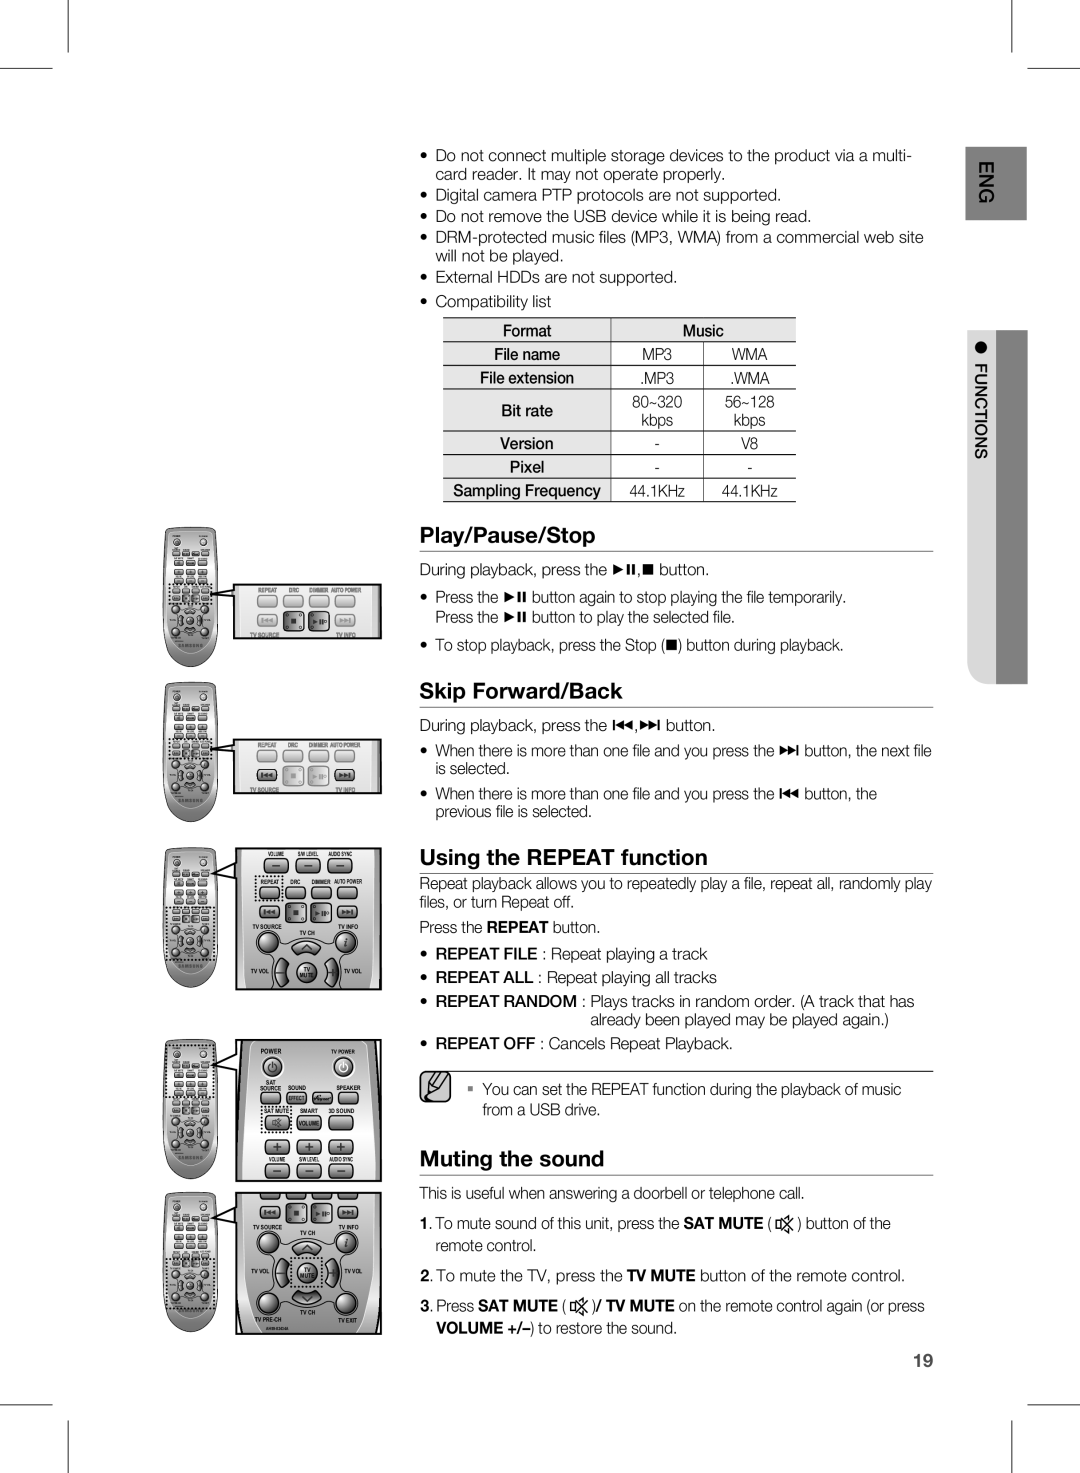 Samsung HW-E450C user manual Play/Pause/Stop, Skip Forward/Back, Using the REPEAT function, Muting the sound 